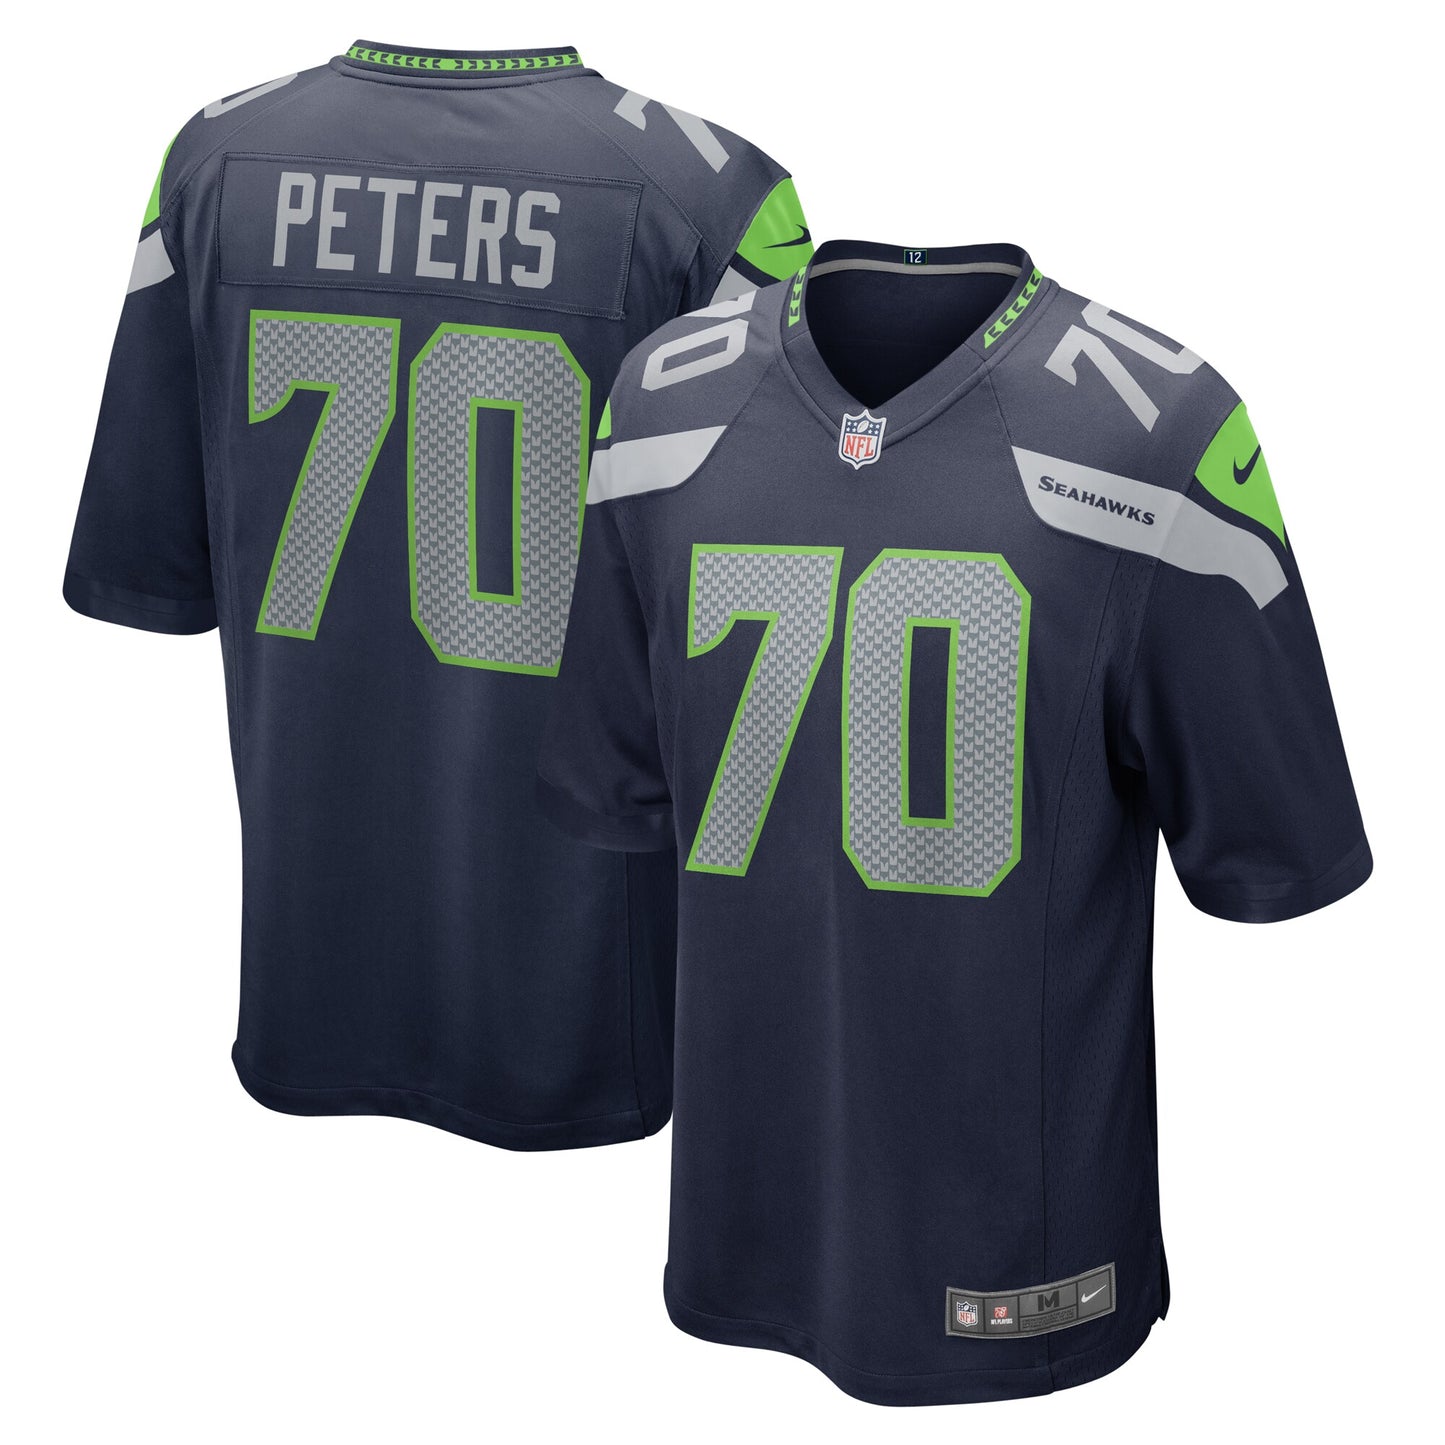 Jason Peters Seattle Seahawks Nike Team Game Jersey - College Navy